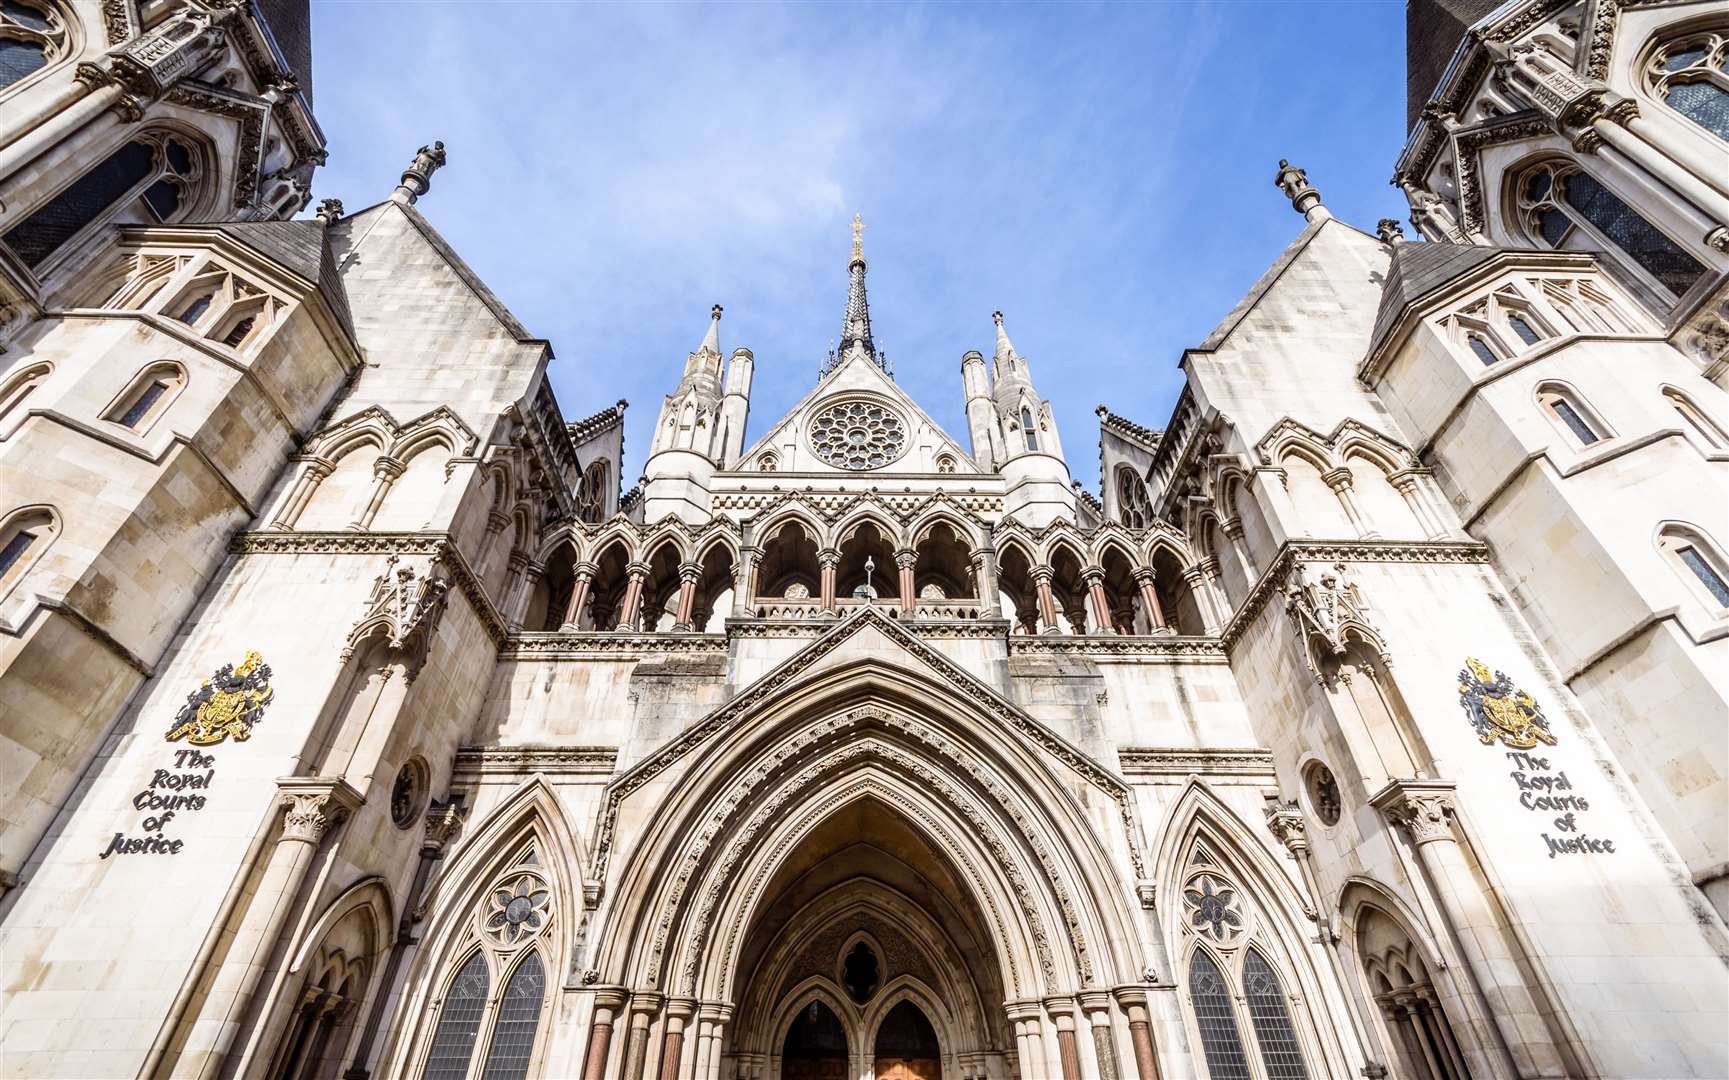 The hearing was held at the High Court in London